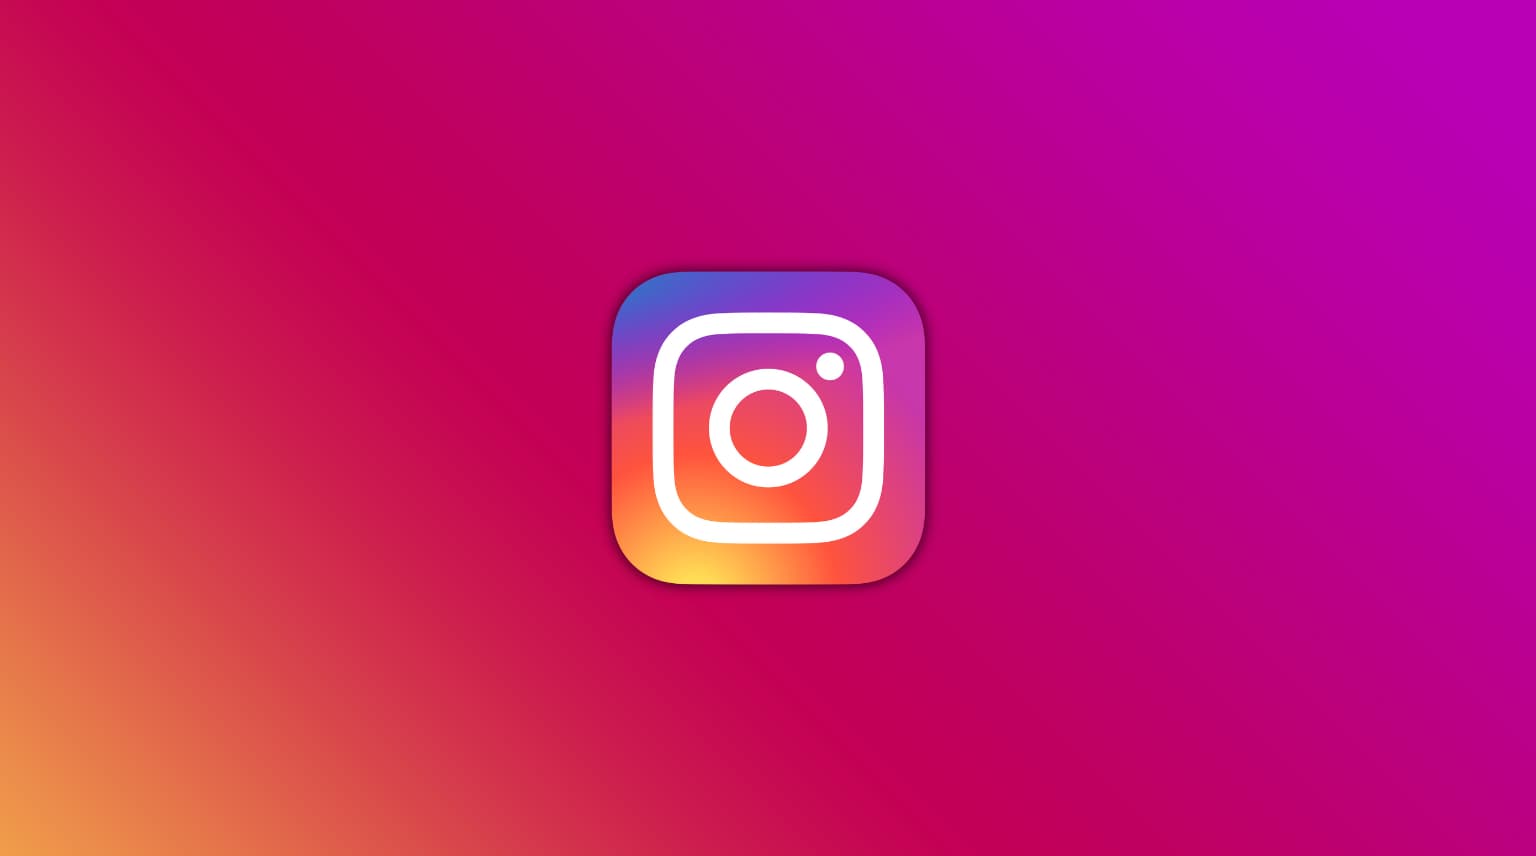 High quality Instagram logo on a gradient background